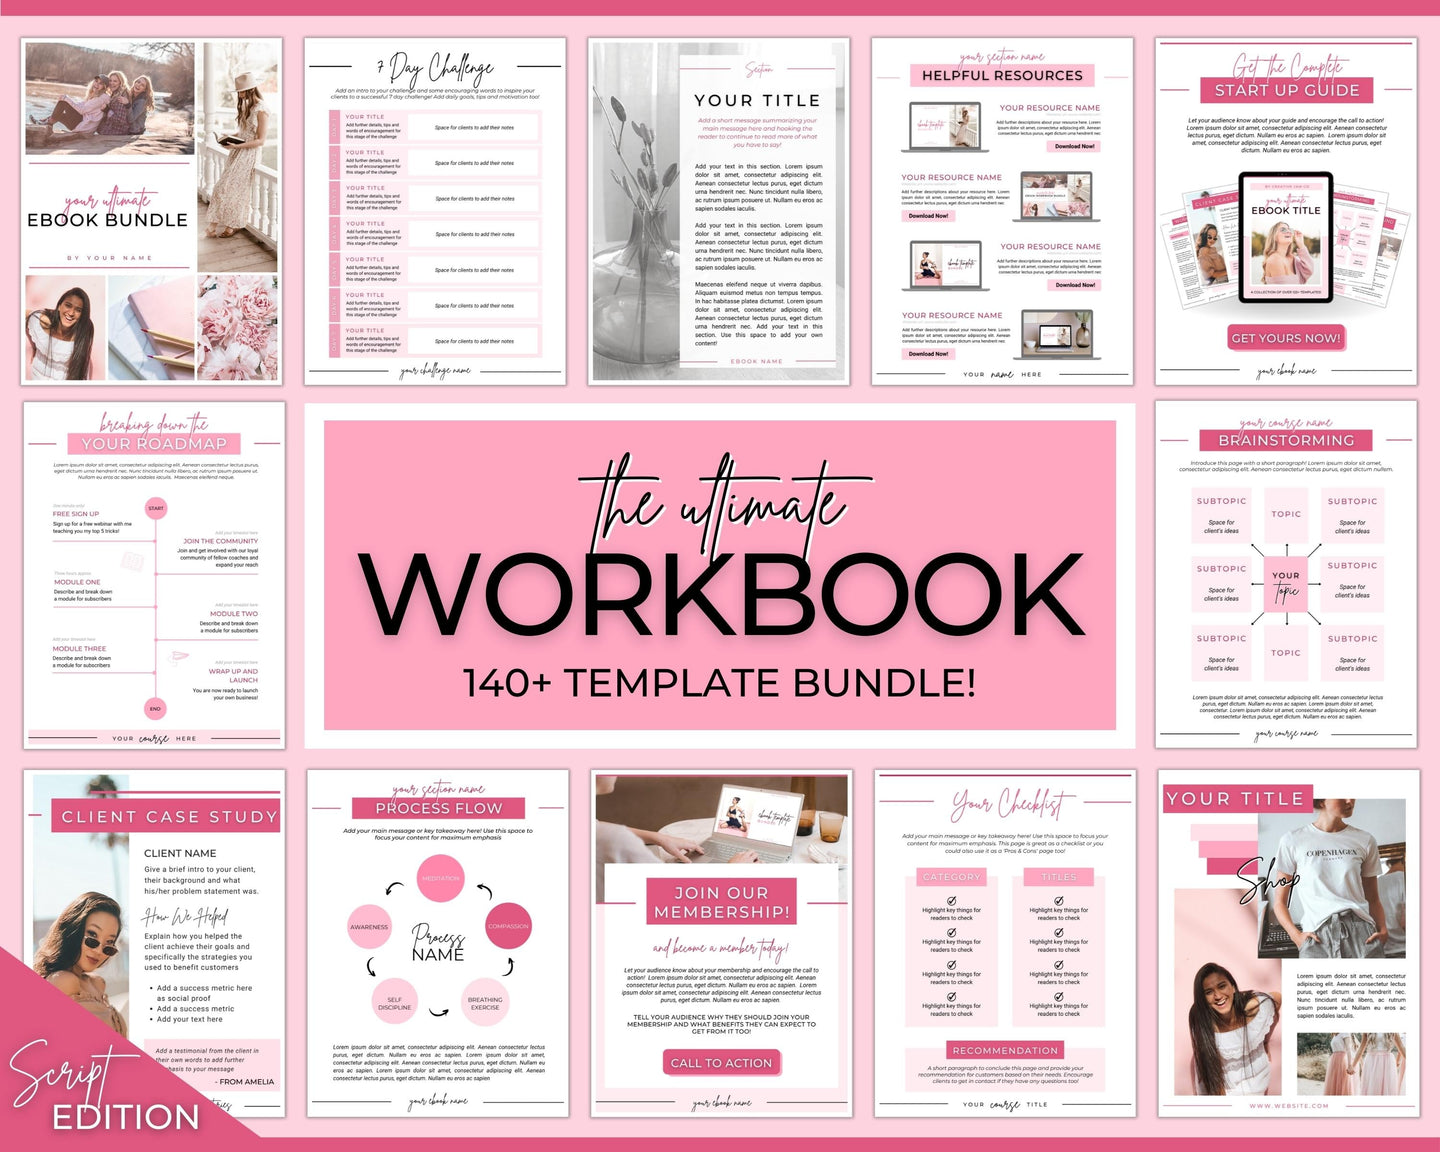 140+ eBook Template Canva, Workbook, Worksheets & Lead Magnet for Coaches, Bloggers. Opt In, Charts, Checklists, Planners, Webinar, Challenges | Brit Pink